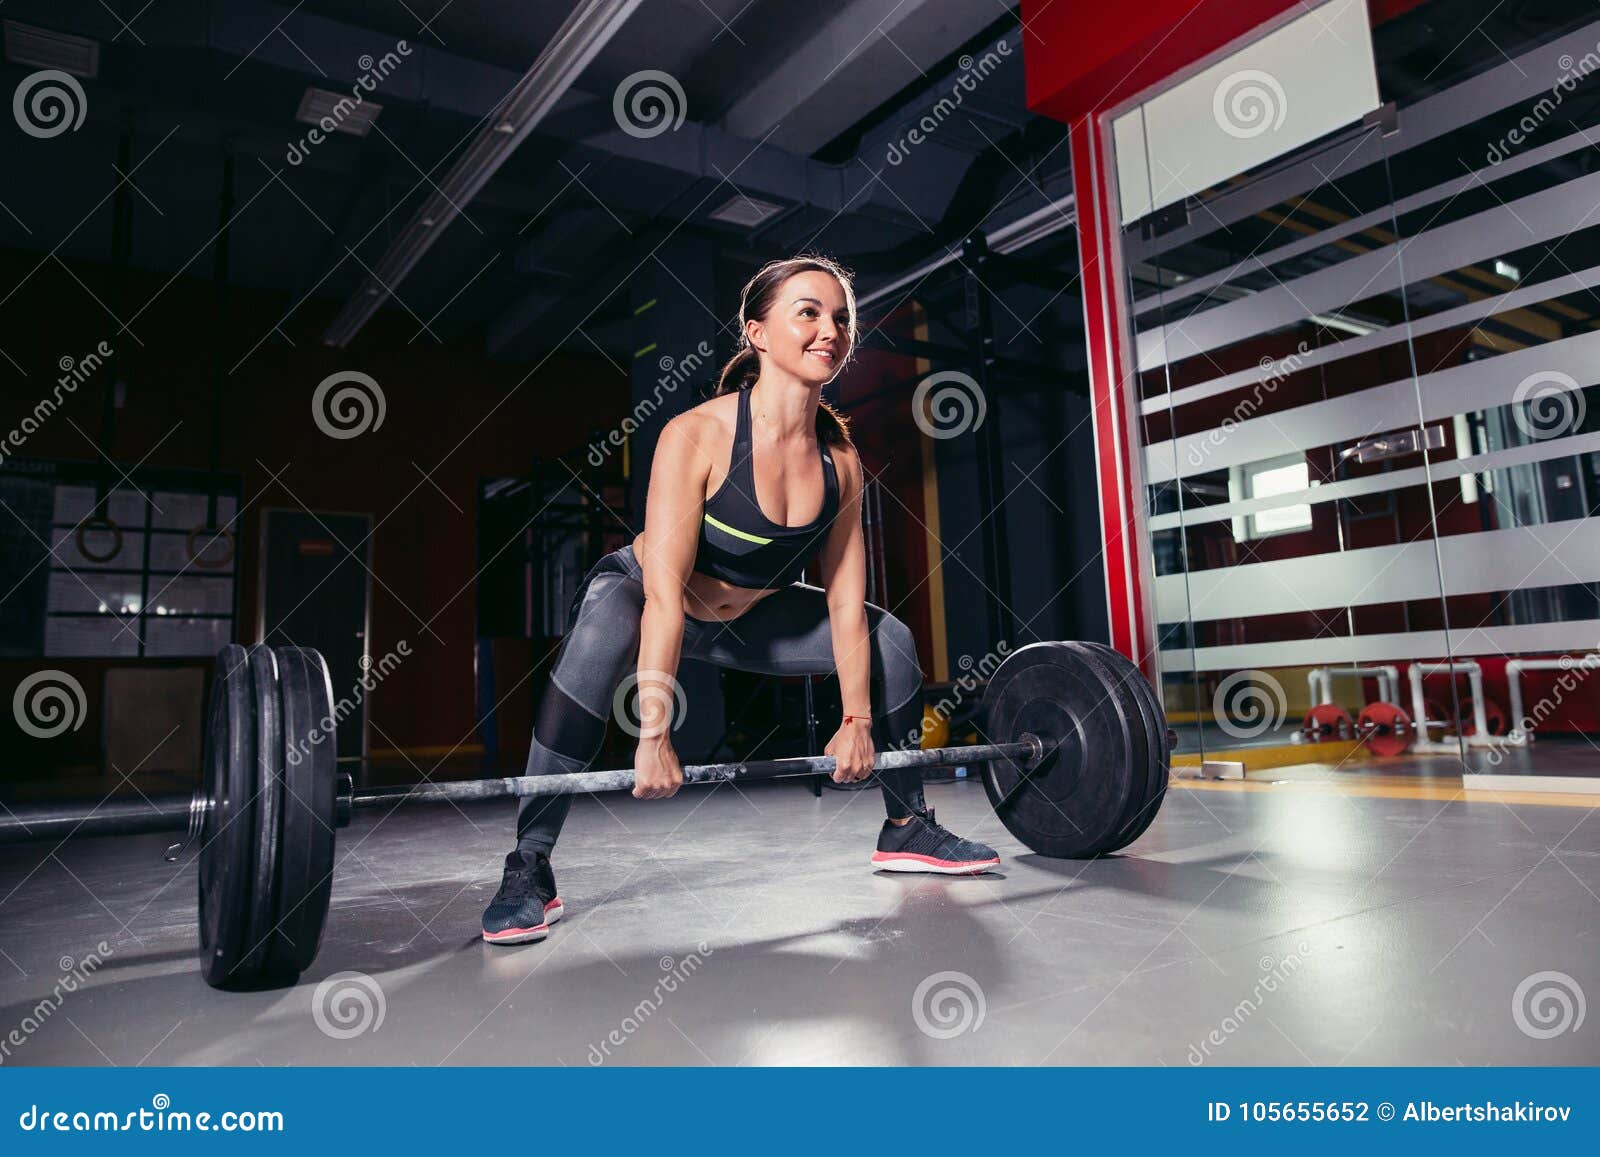 Young Athletic Woman Doing Deadlift with Barbell Stock Photo - Image of ...